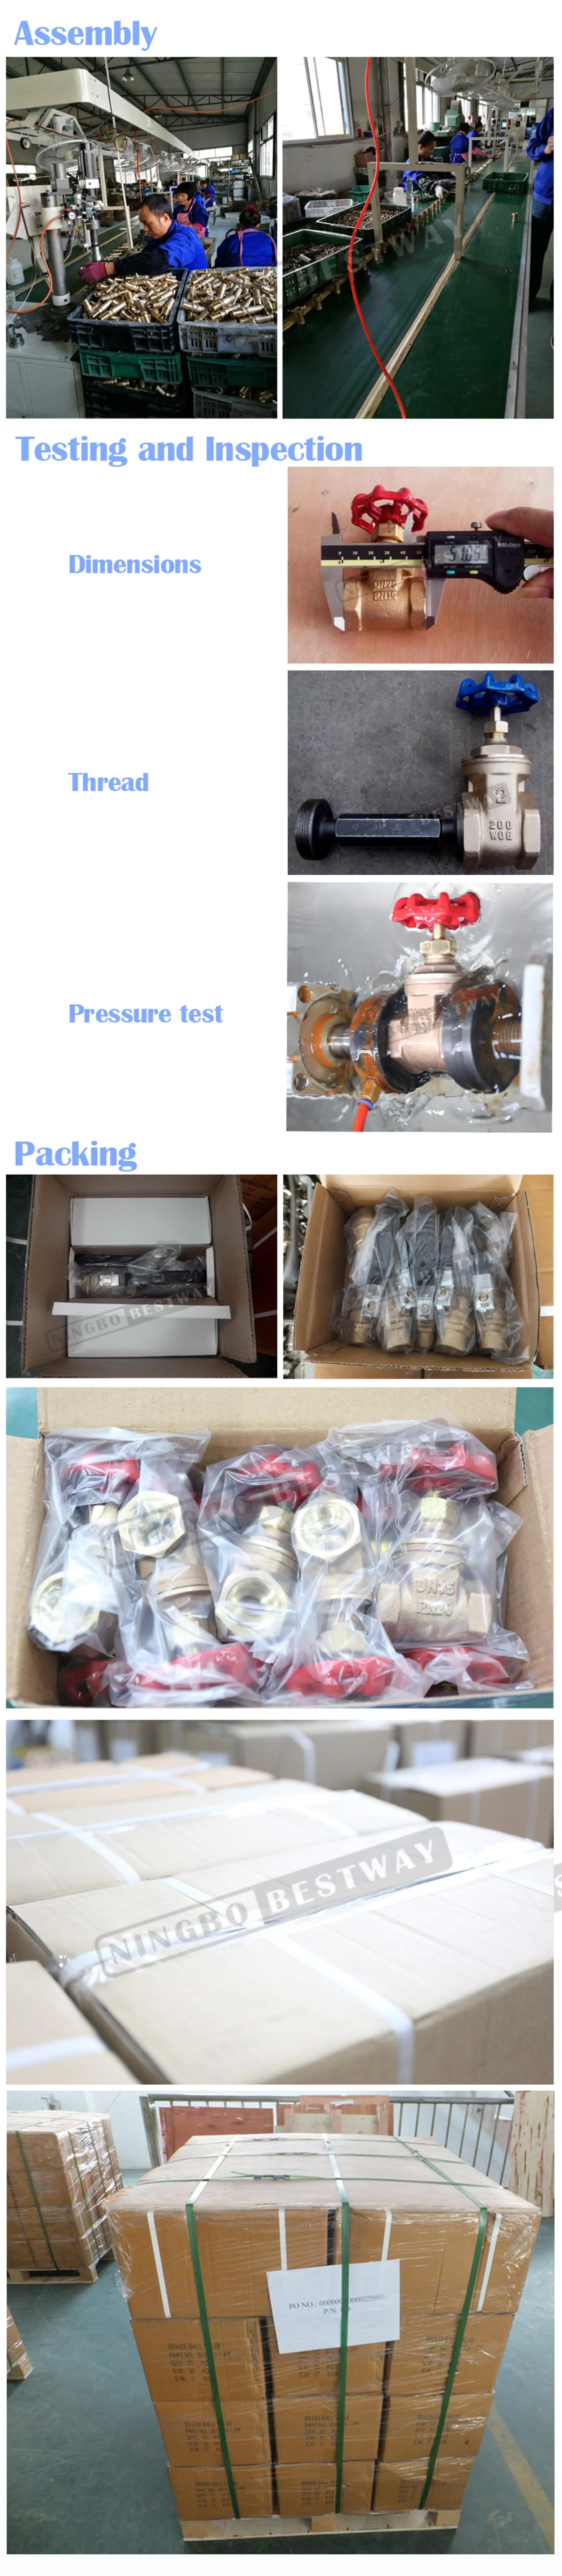 Assemb Test and packing